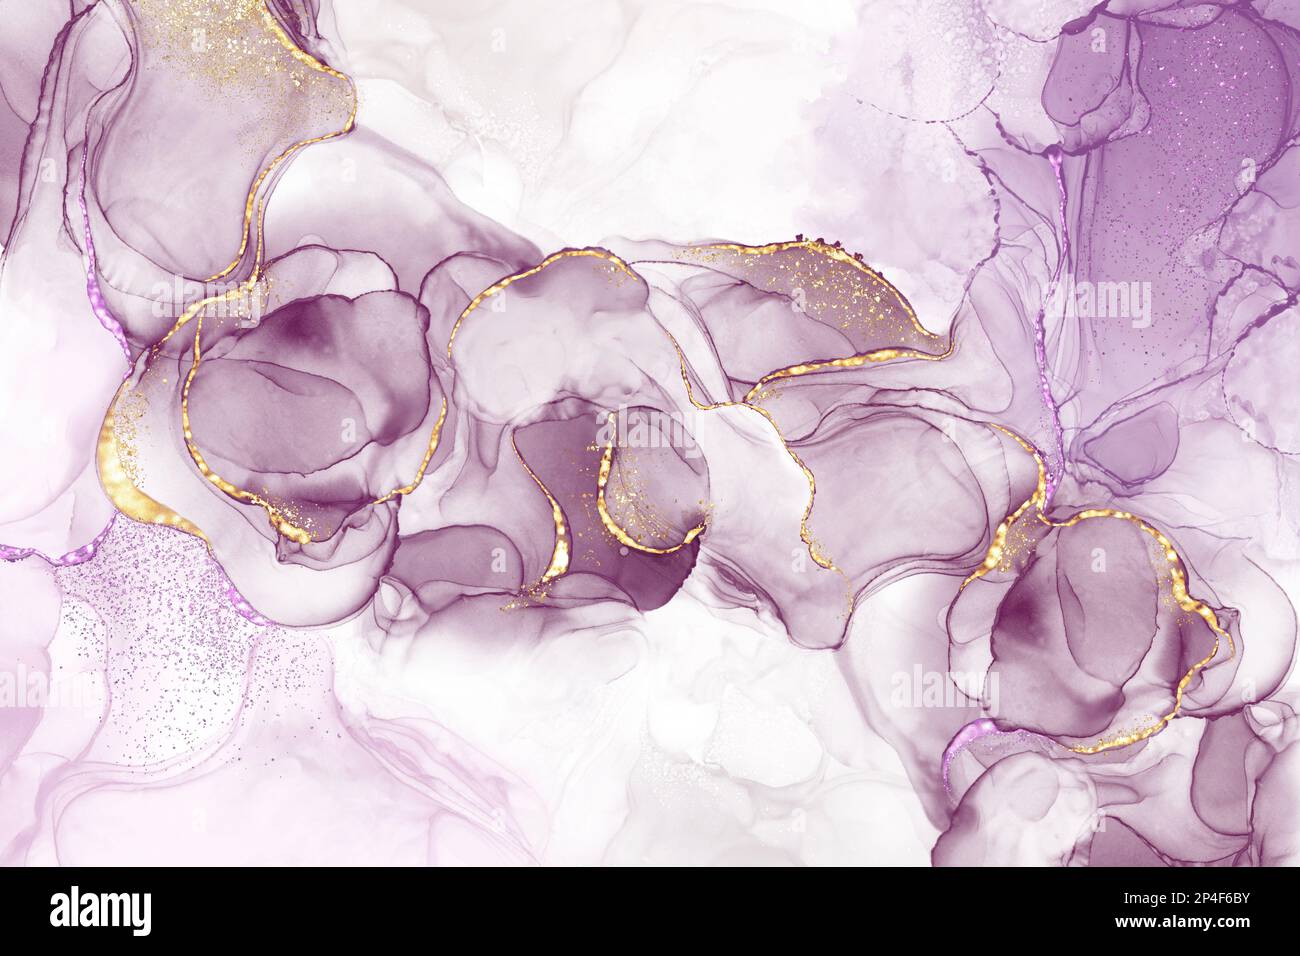 Abstract fluid art with alcohol ink technique painting, and decorated with gold foil glitter splash luxurious. Suitable for backgrounds, banners. Stock Photo